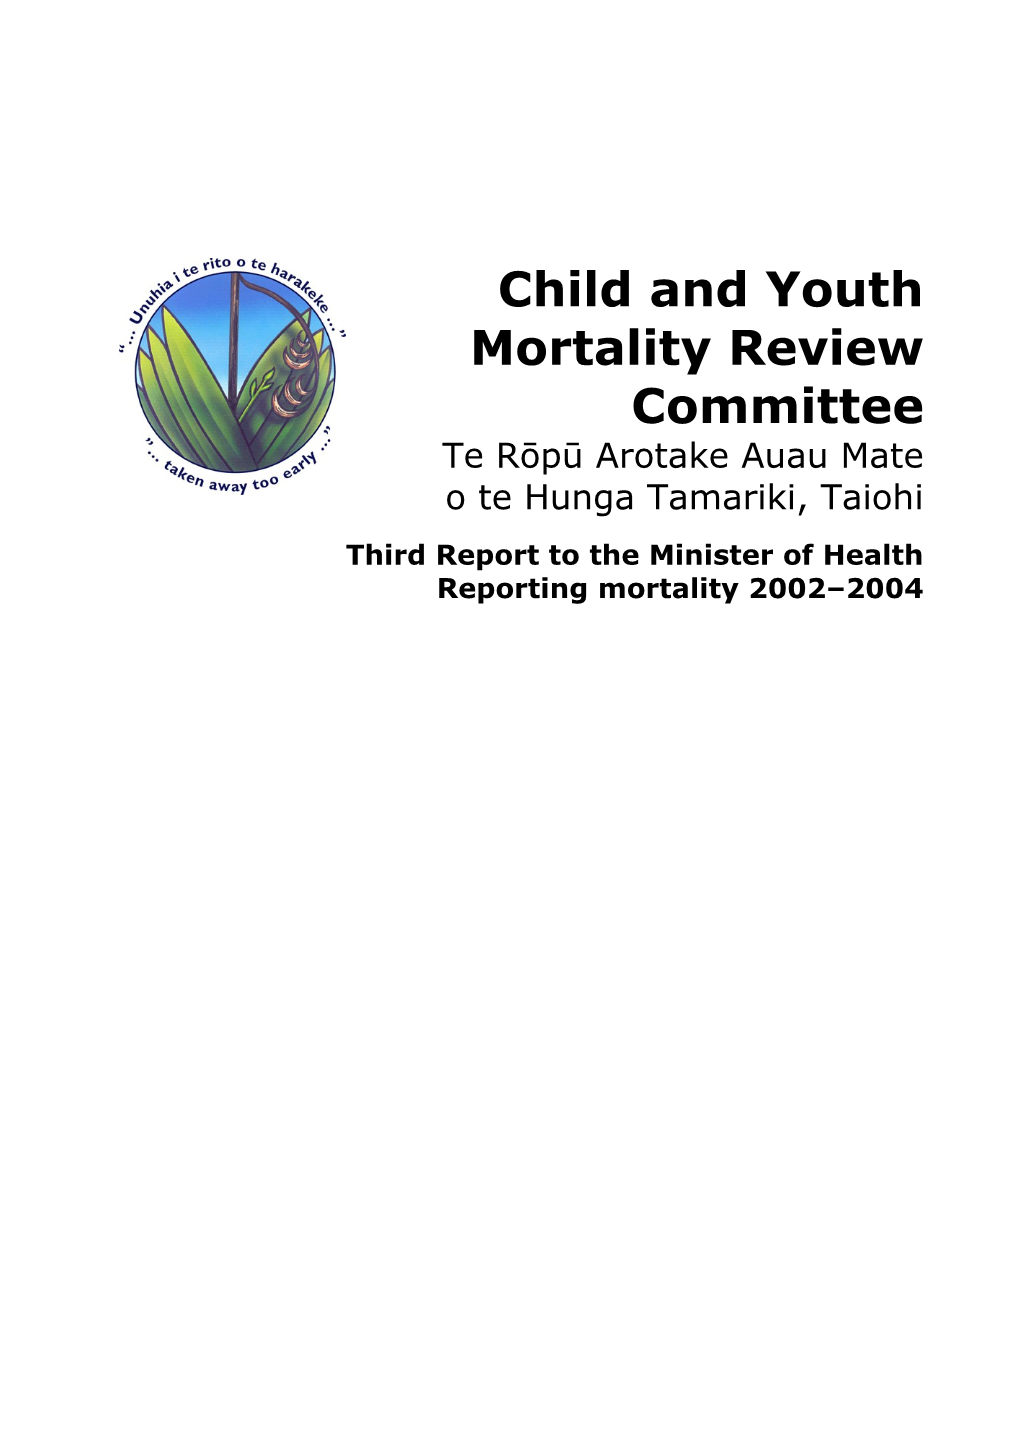 Child and Youth Mortality Review Committee - Second Report to the Minister of Health